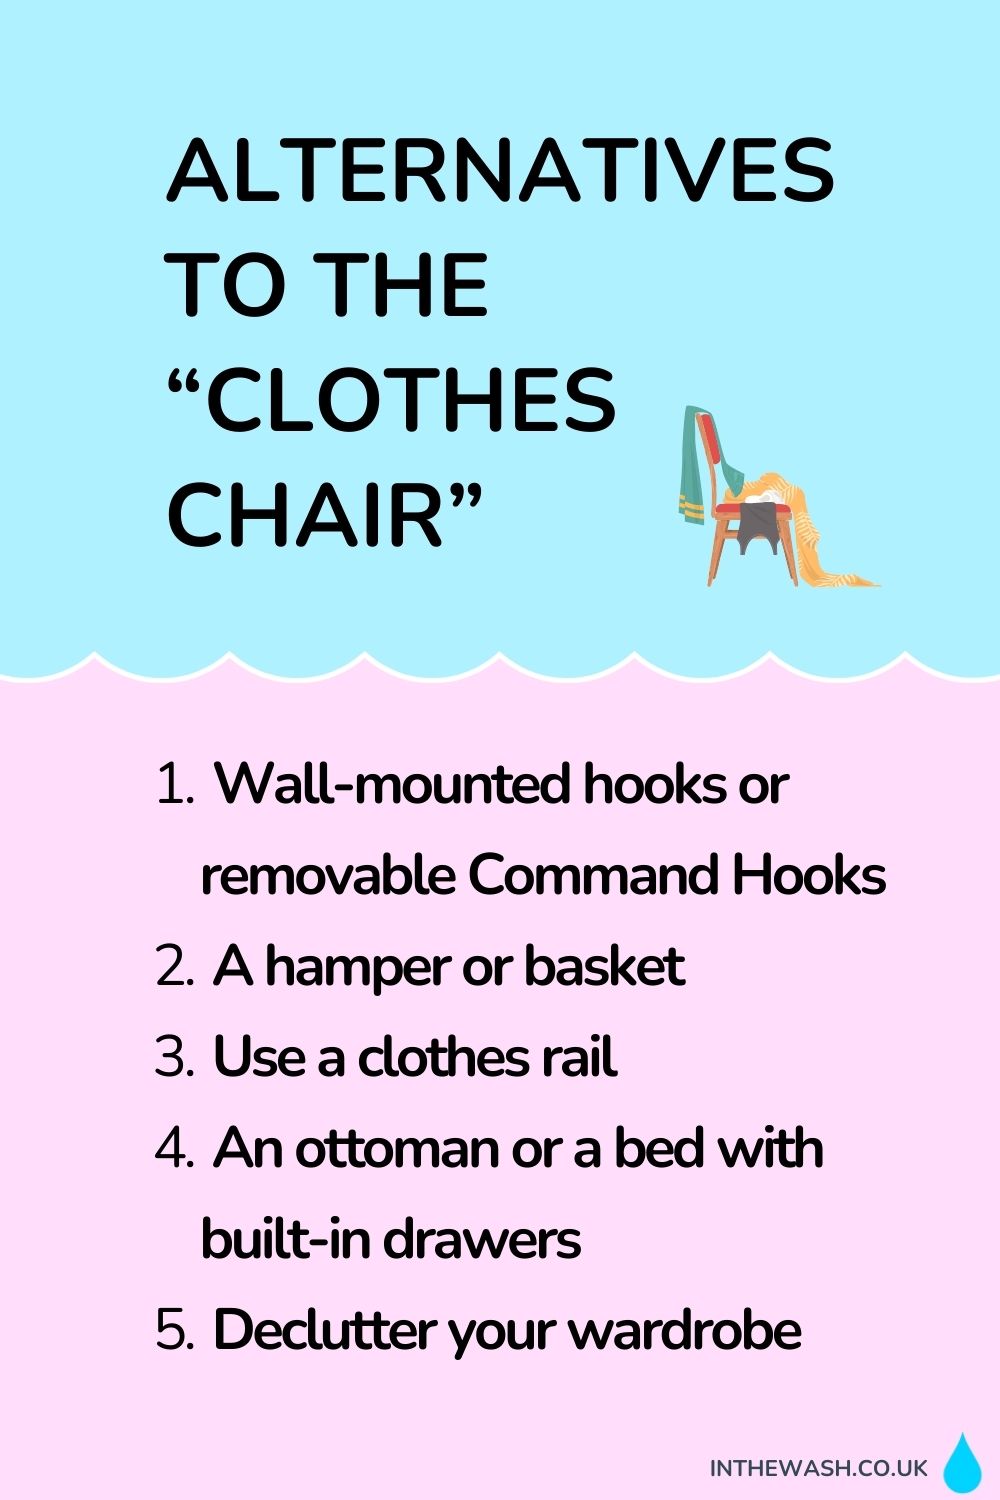 Alternatives to the "Clothes Chair"